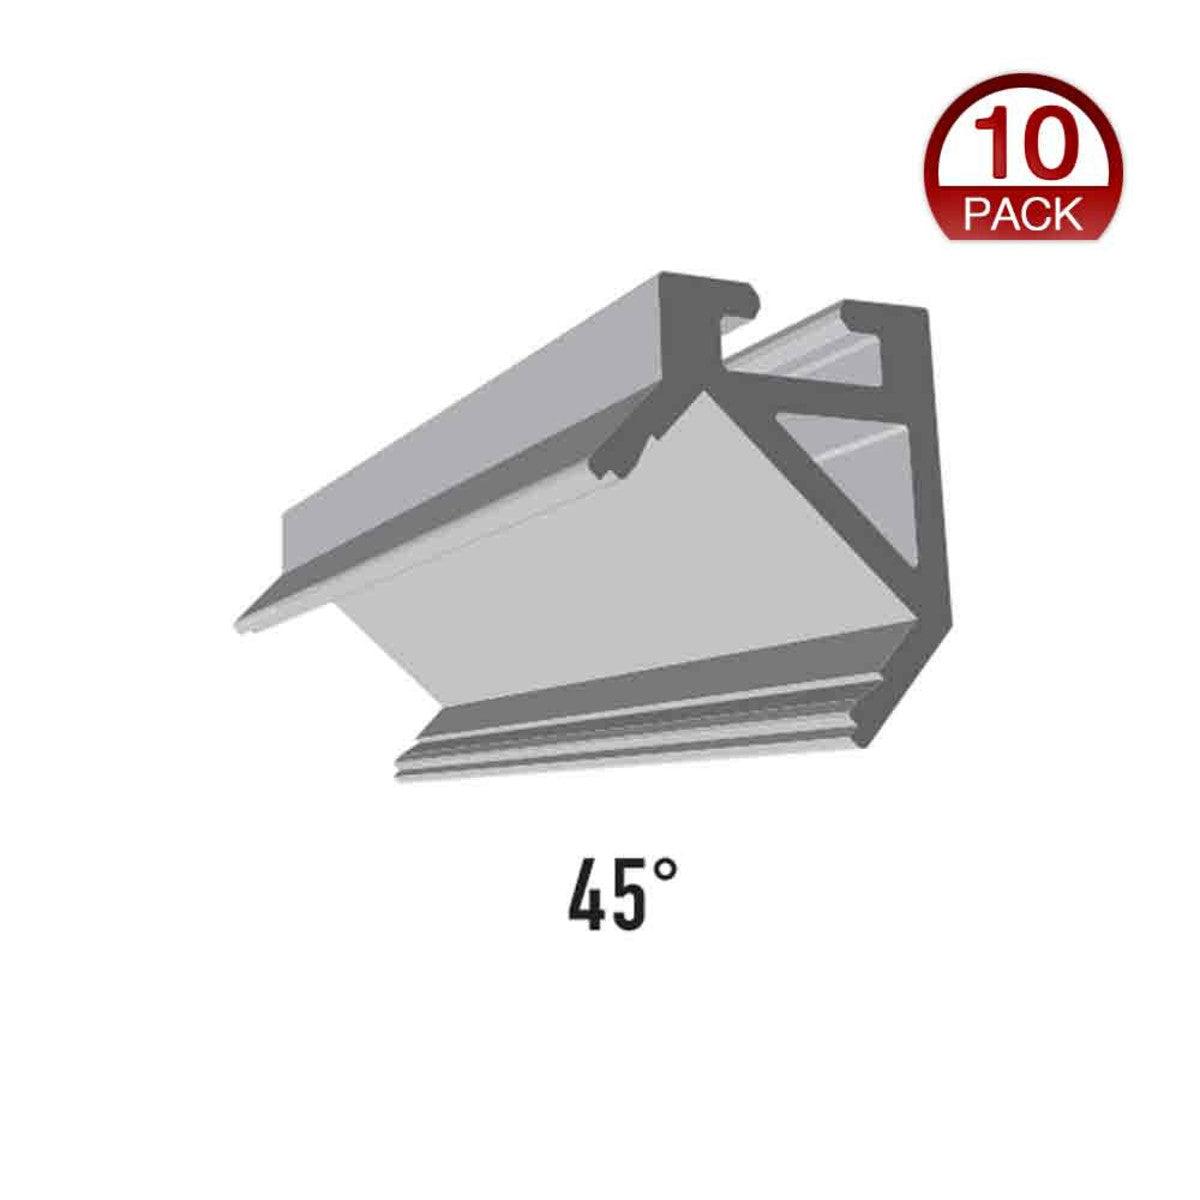 96in. Chromapath Builder, 45 degree LED Aluminum channel, Corner, for Strips Up To 12mm, Pack of 10 - Bees Lighting